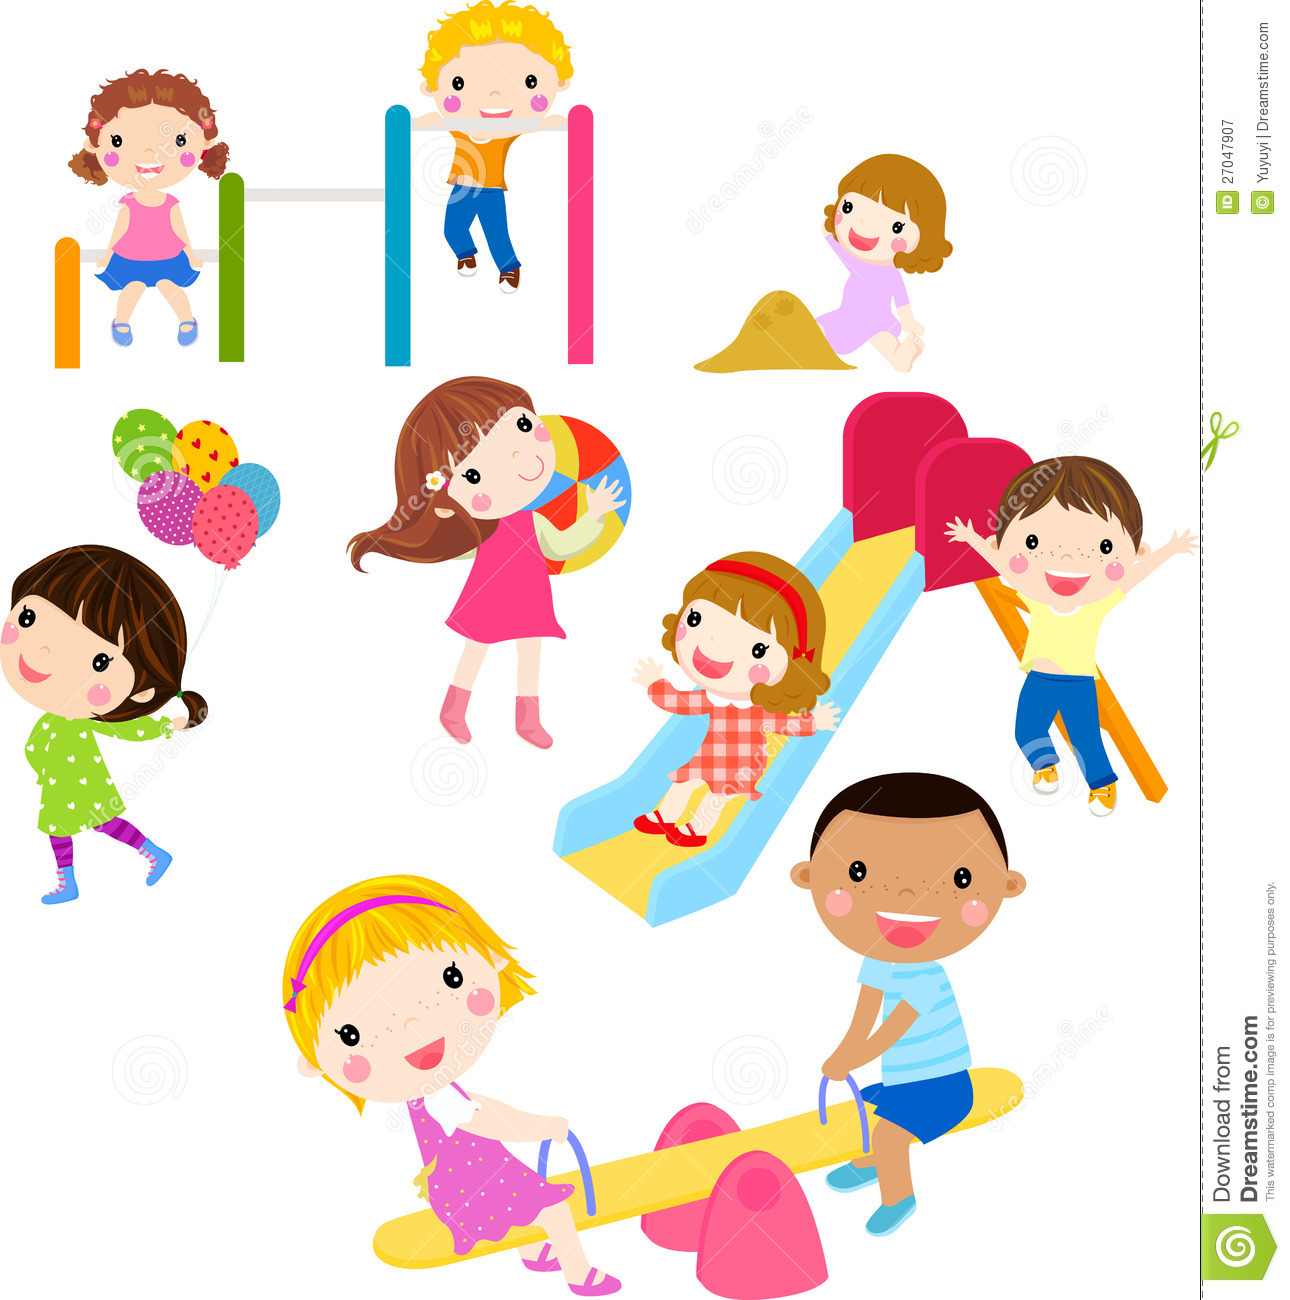 Group Of Children Having Fun Royalty Free Stock Photography   Image